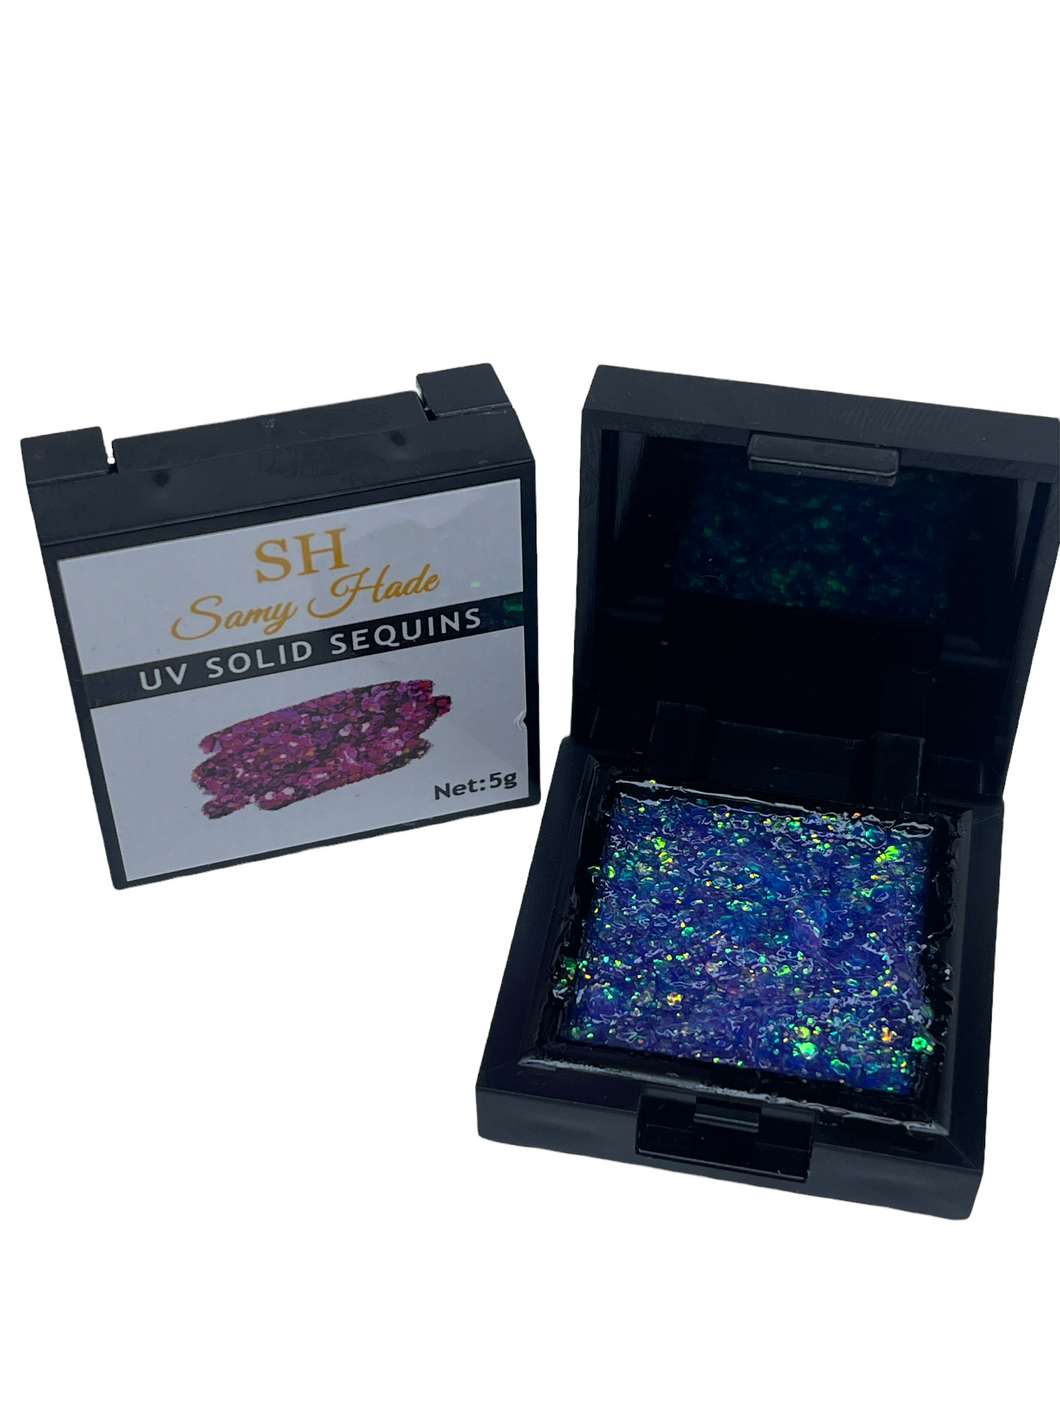 UV solid sequins #15